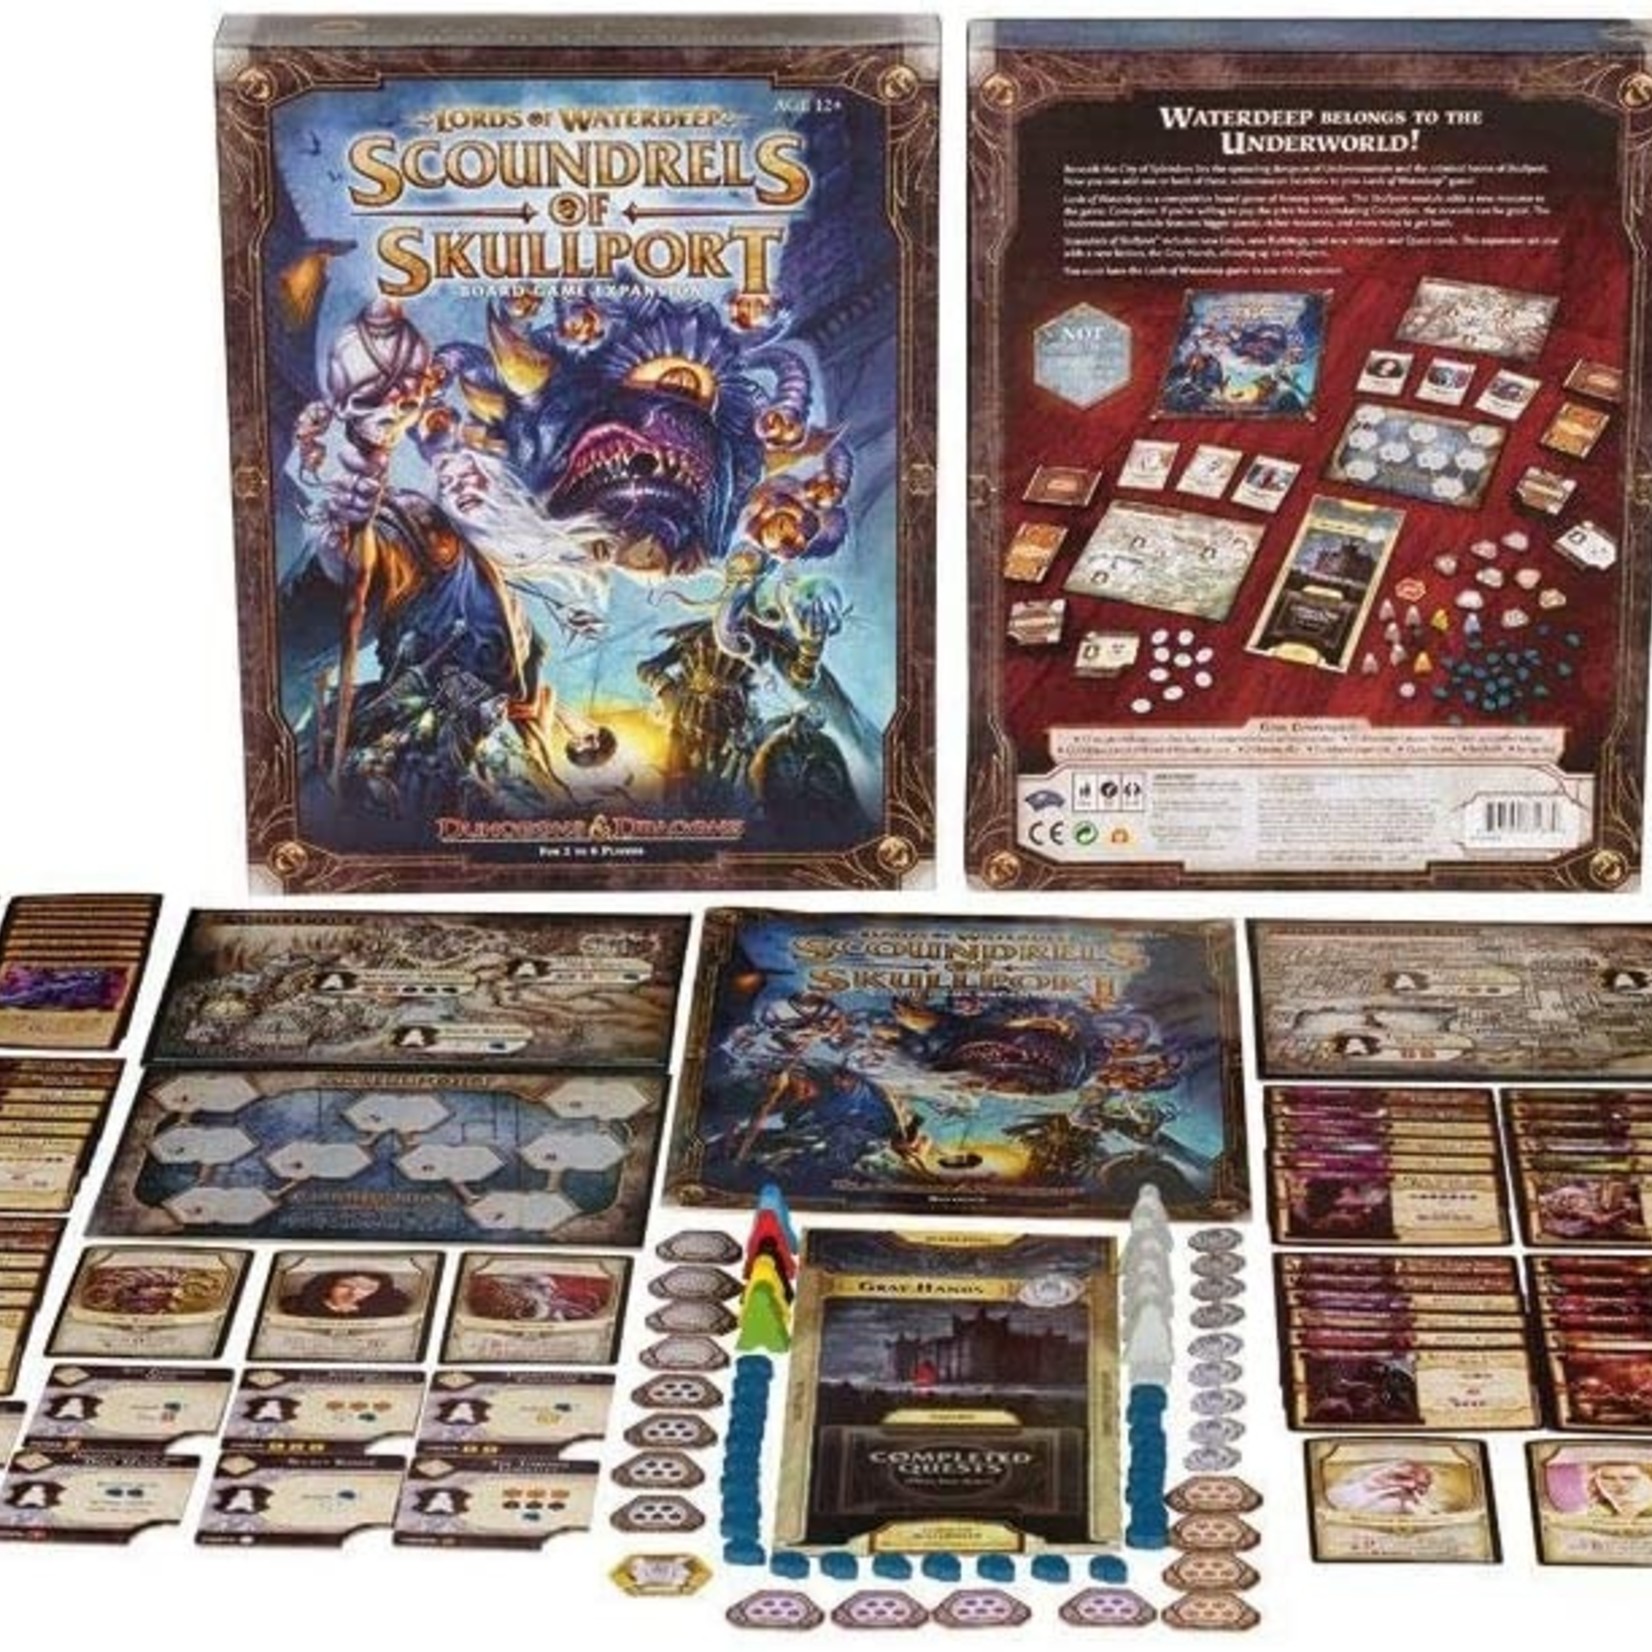 Wizards of the Coast Lords of Waterdeep Scoundrels of Skullport Expansion Dungeons and Dragons